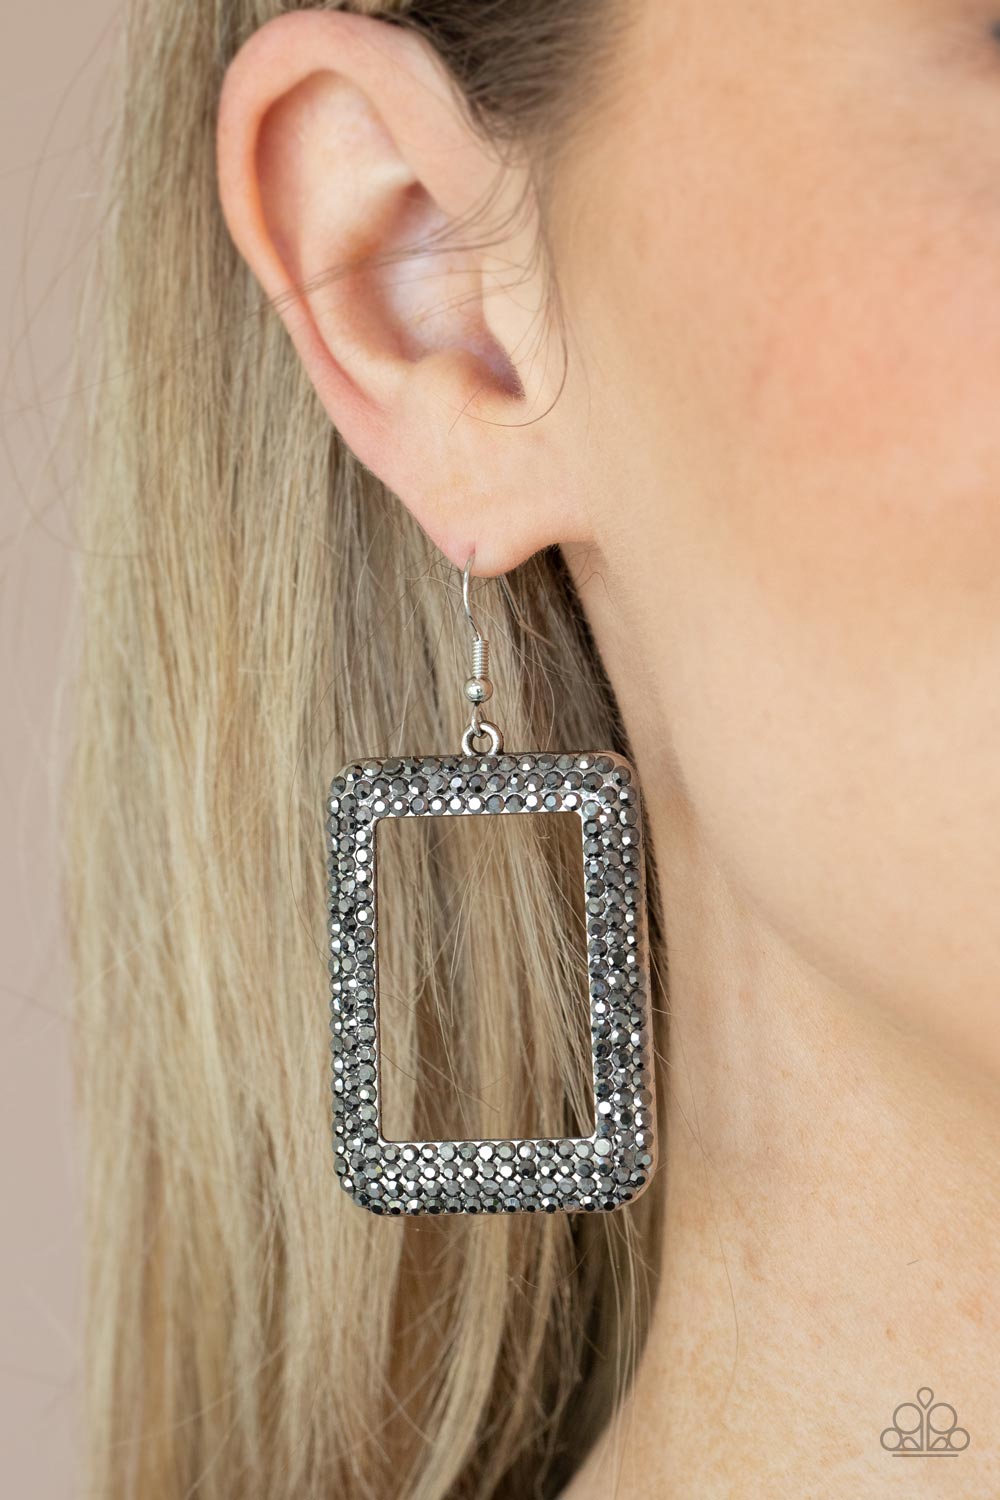 Paparazzi Accessories World FRAME-OUS - Silver Fishhook Earrings bordered in rows of smoky hematite rhinestones, an oversized silver rectangular frame swings from the ear for a fashionable finish. Earring attaches to a standard fishhook fitting.